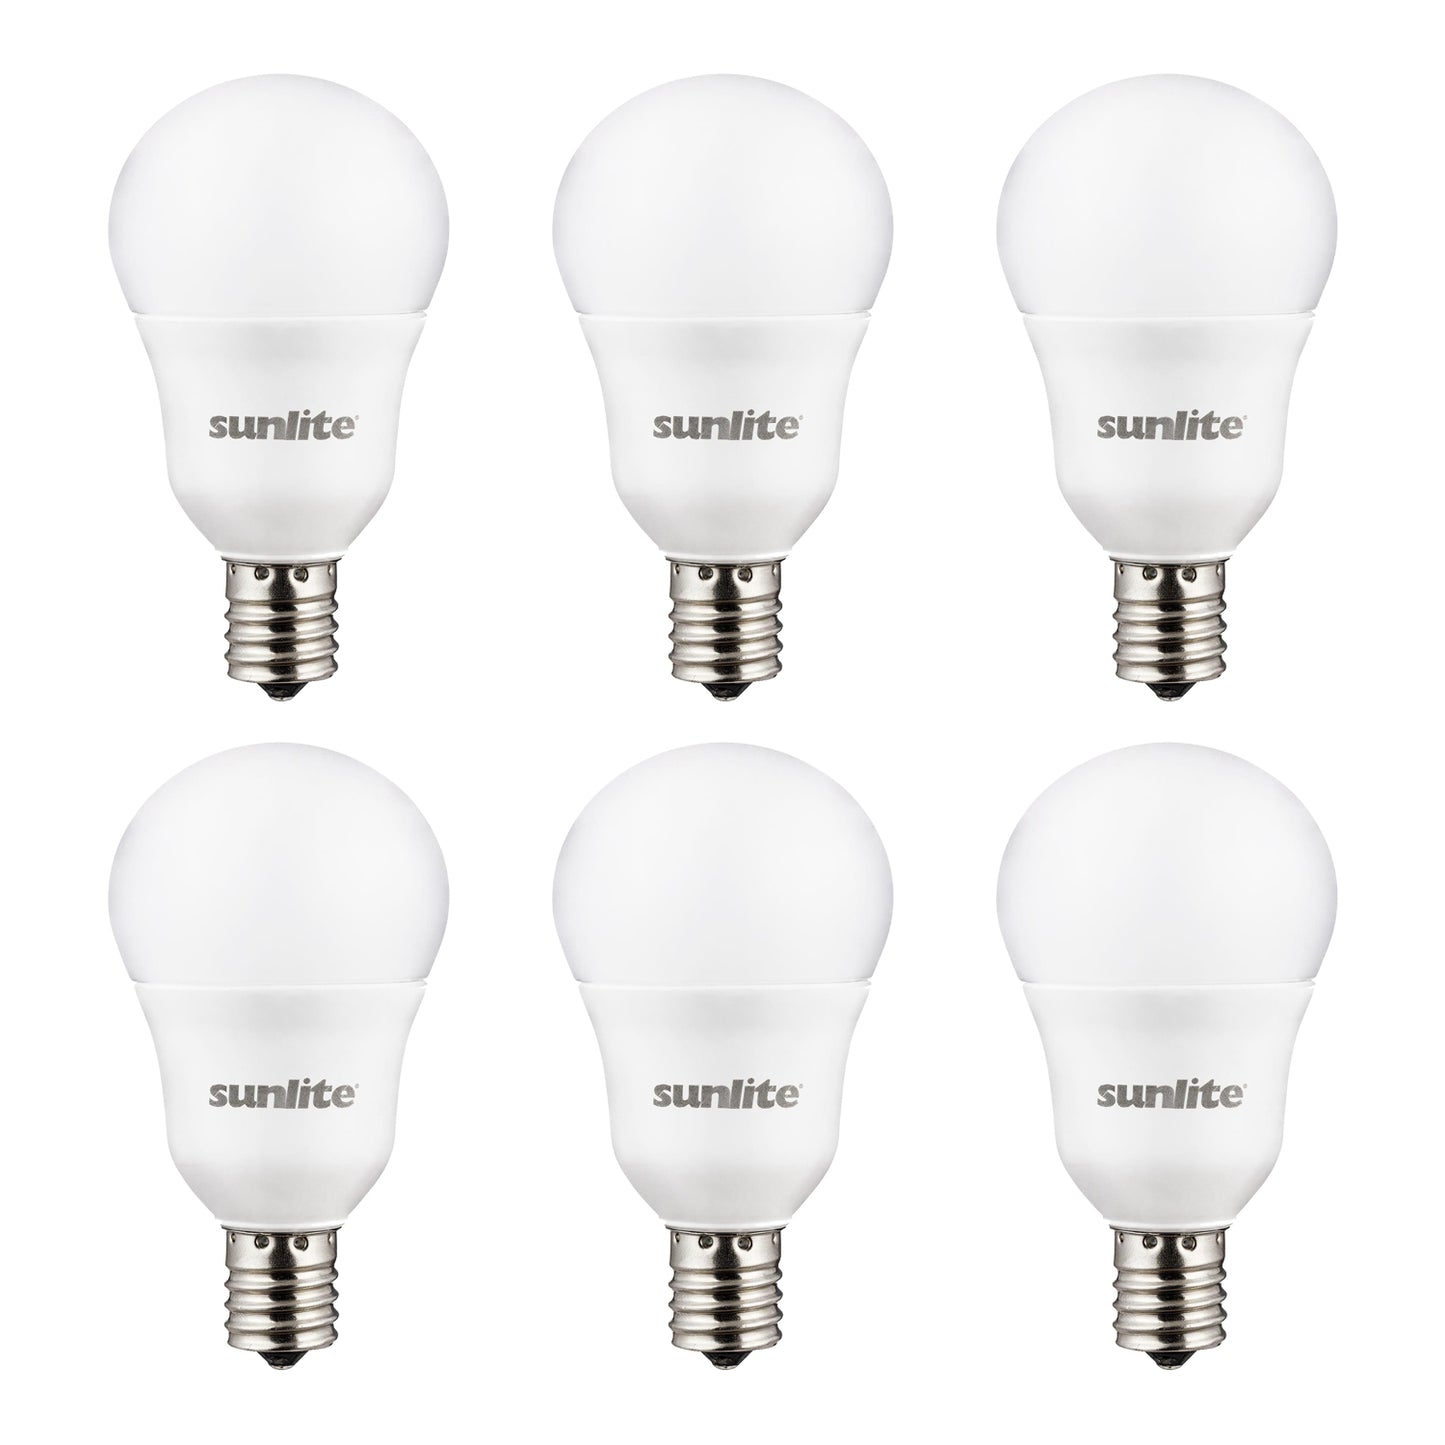 Sunlite 41409-SU LED A15 Light Bulb, 6 Watts (40W Equivalent), Intermediate Base (E17), 480 Lumens, Dimmable, Frosted Finish, ETL Listed, 30K -Warm White 6 Pack